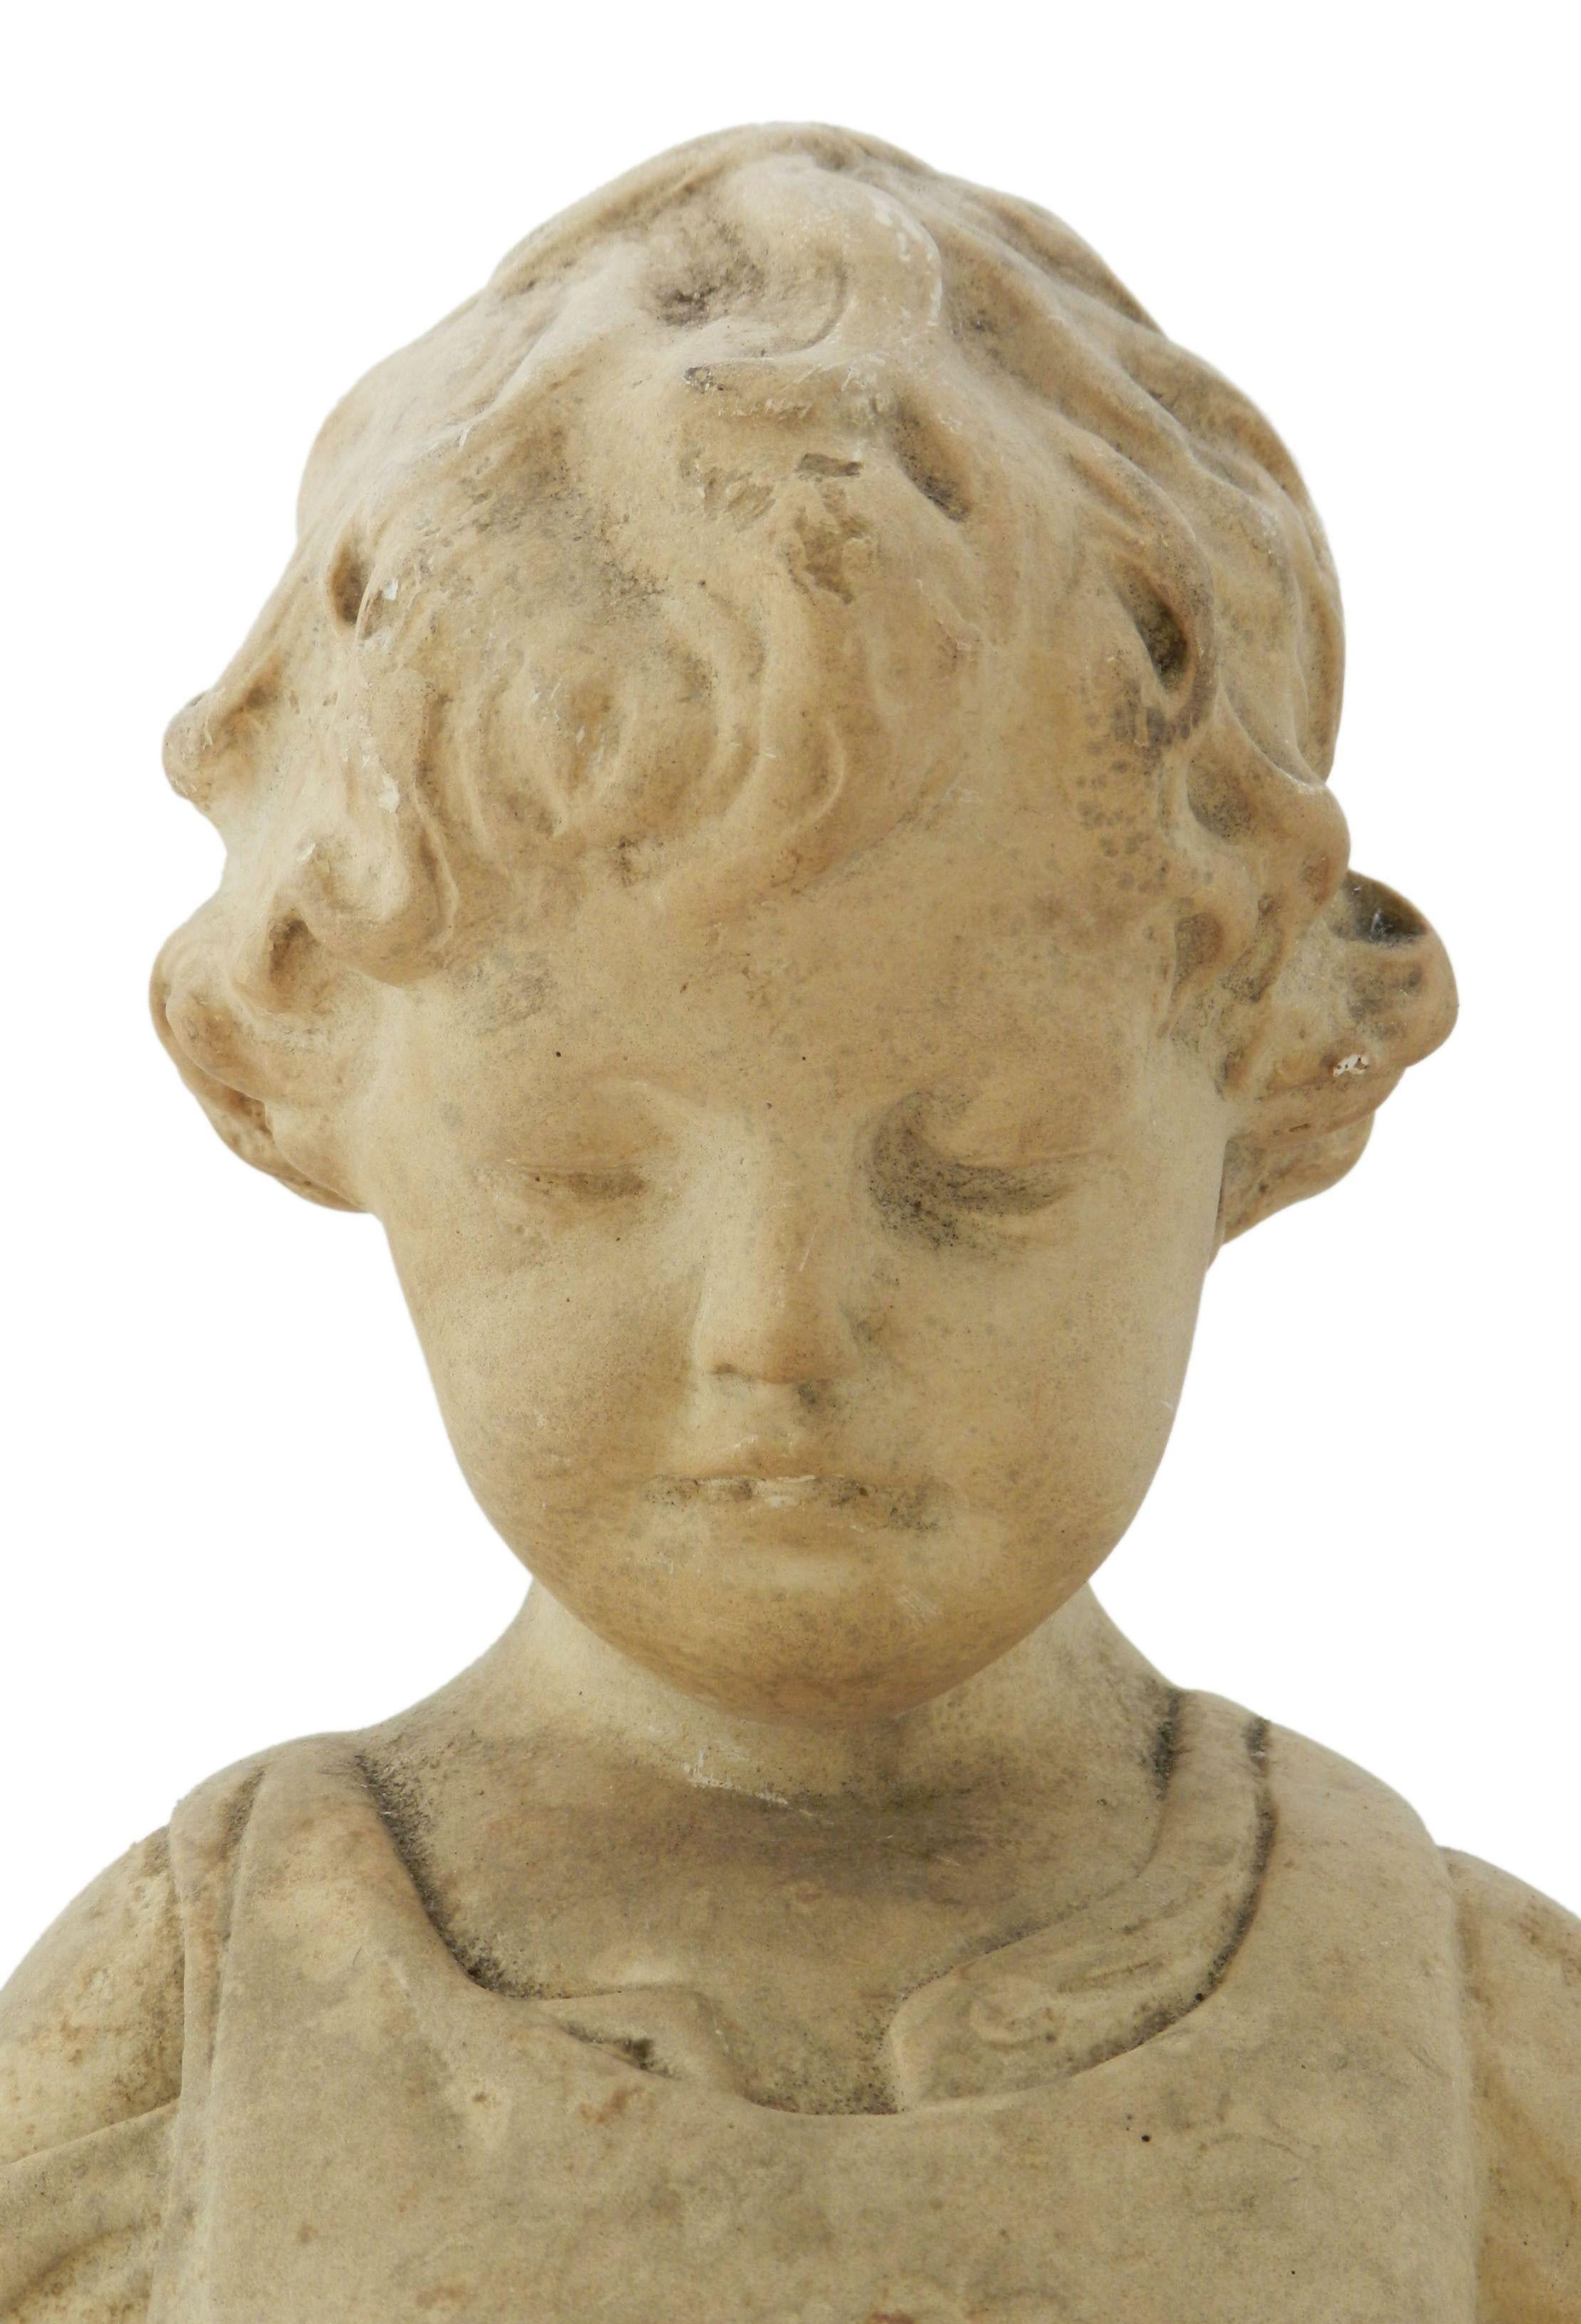 Belle Époque Boy with Frog Chalkware Hard Plaster Statue, c1910-20 FREE SHIPPING